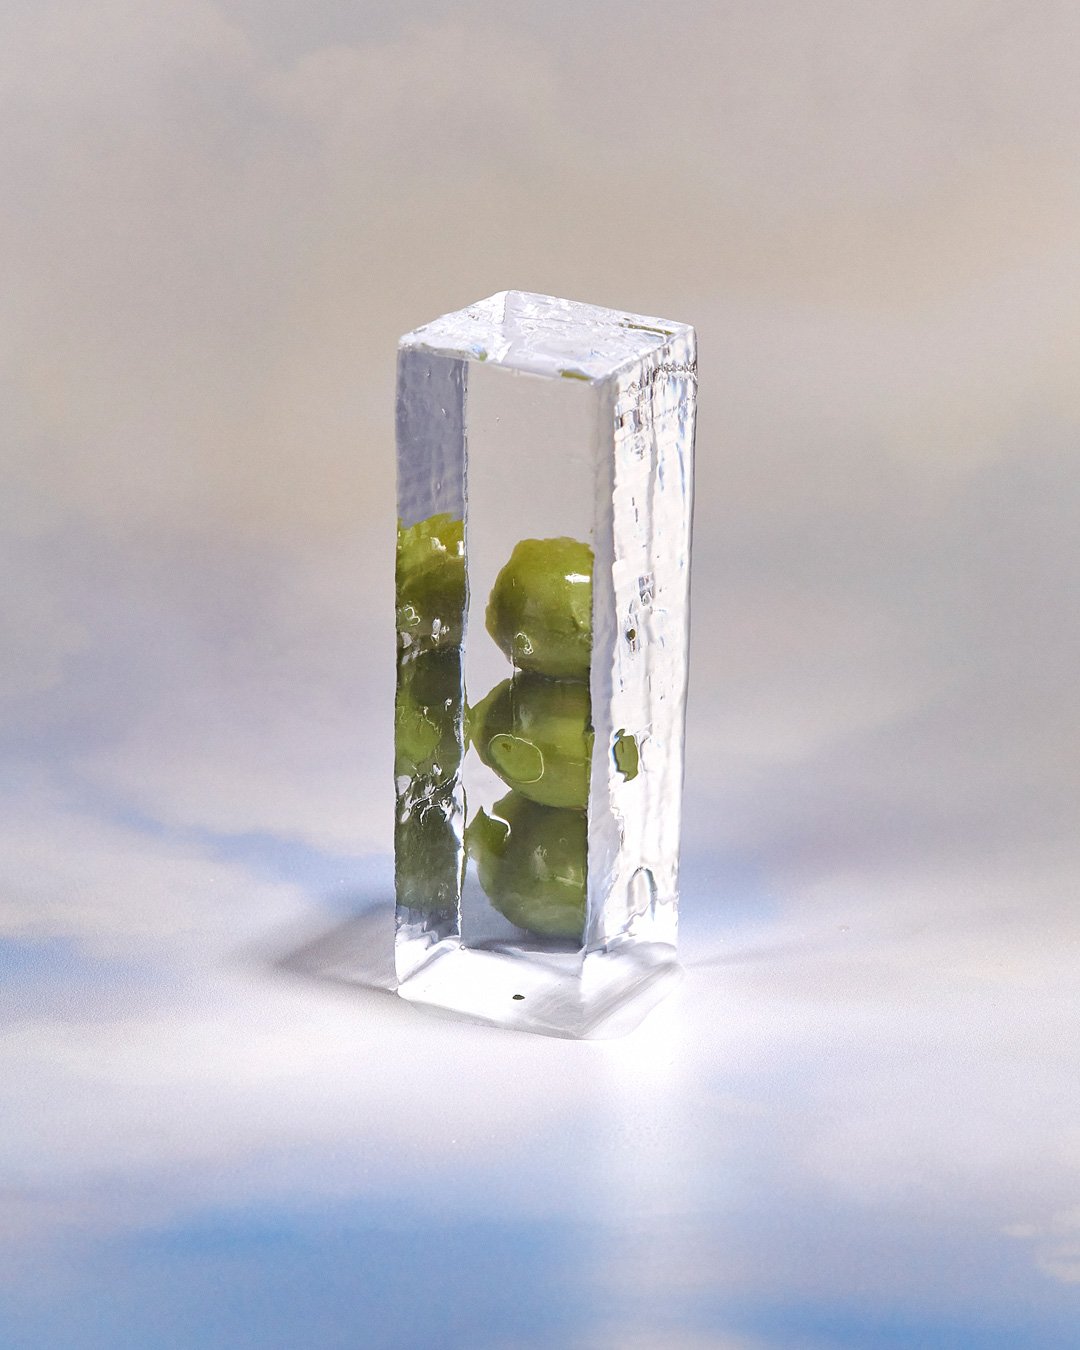 Bare-Bones-Ice-olives-shot-by-Mark-Sherborne-styled-by-Claire-Mueller.jpg